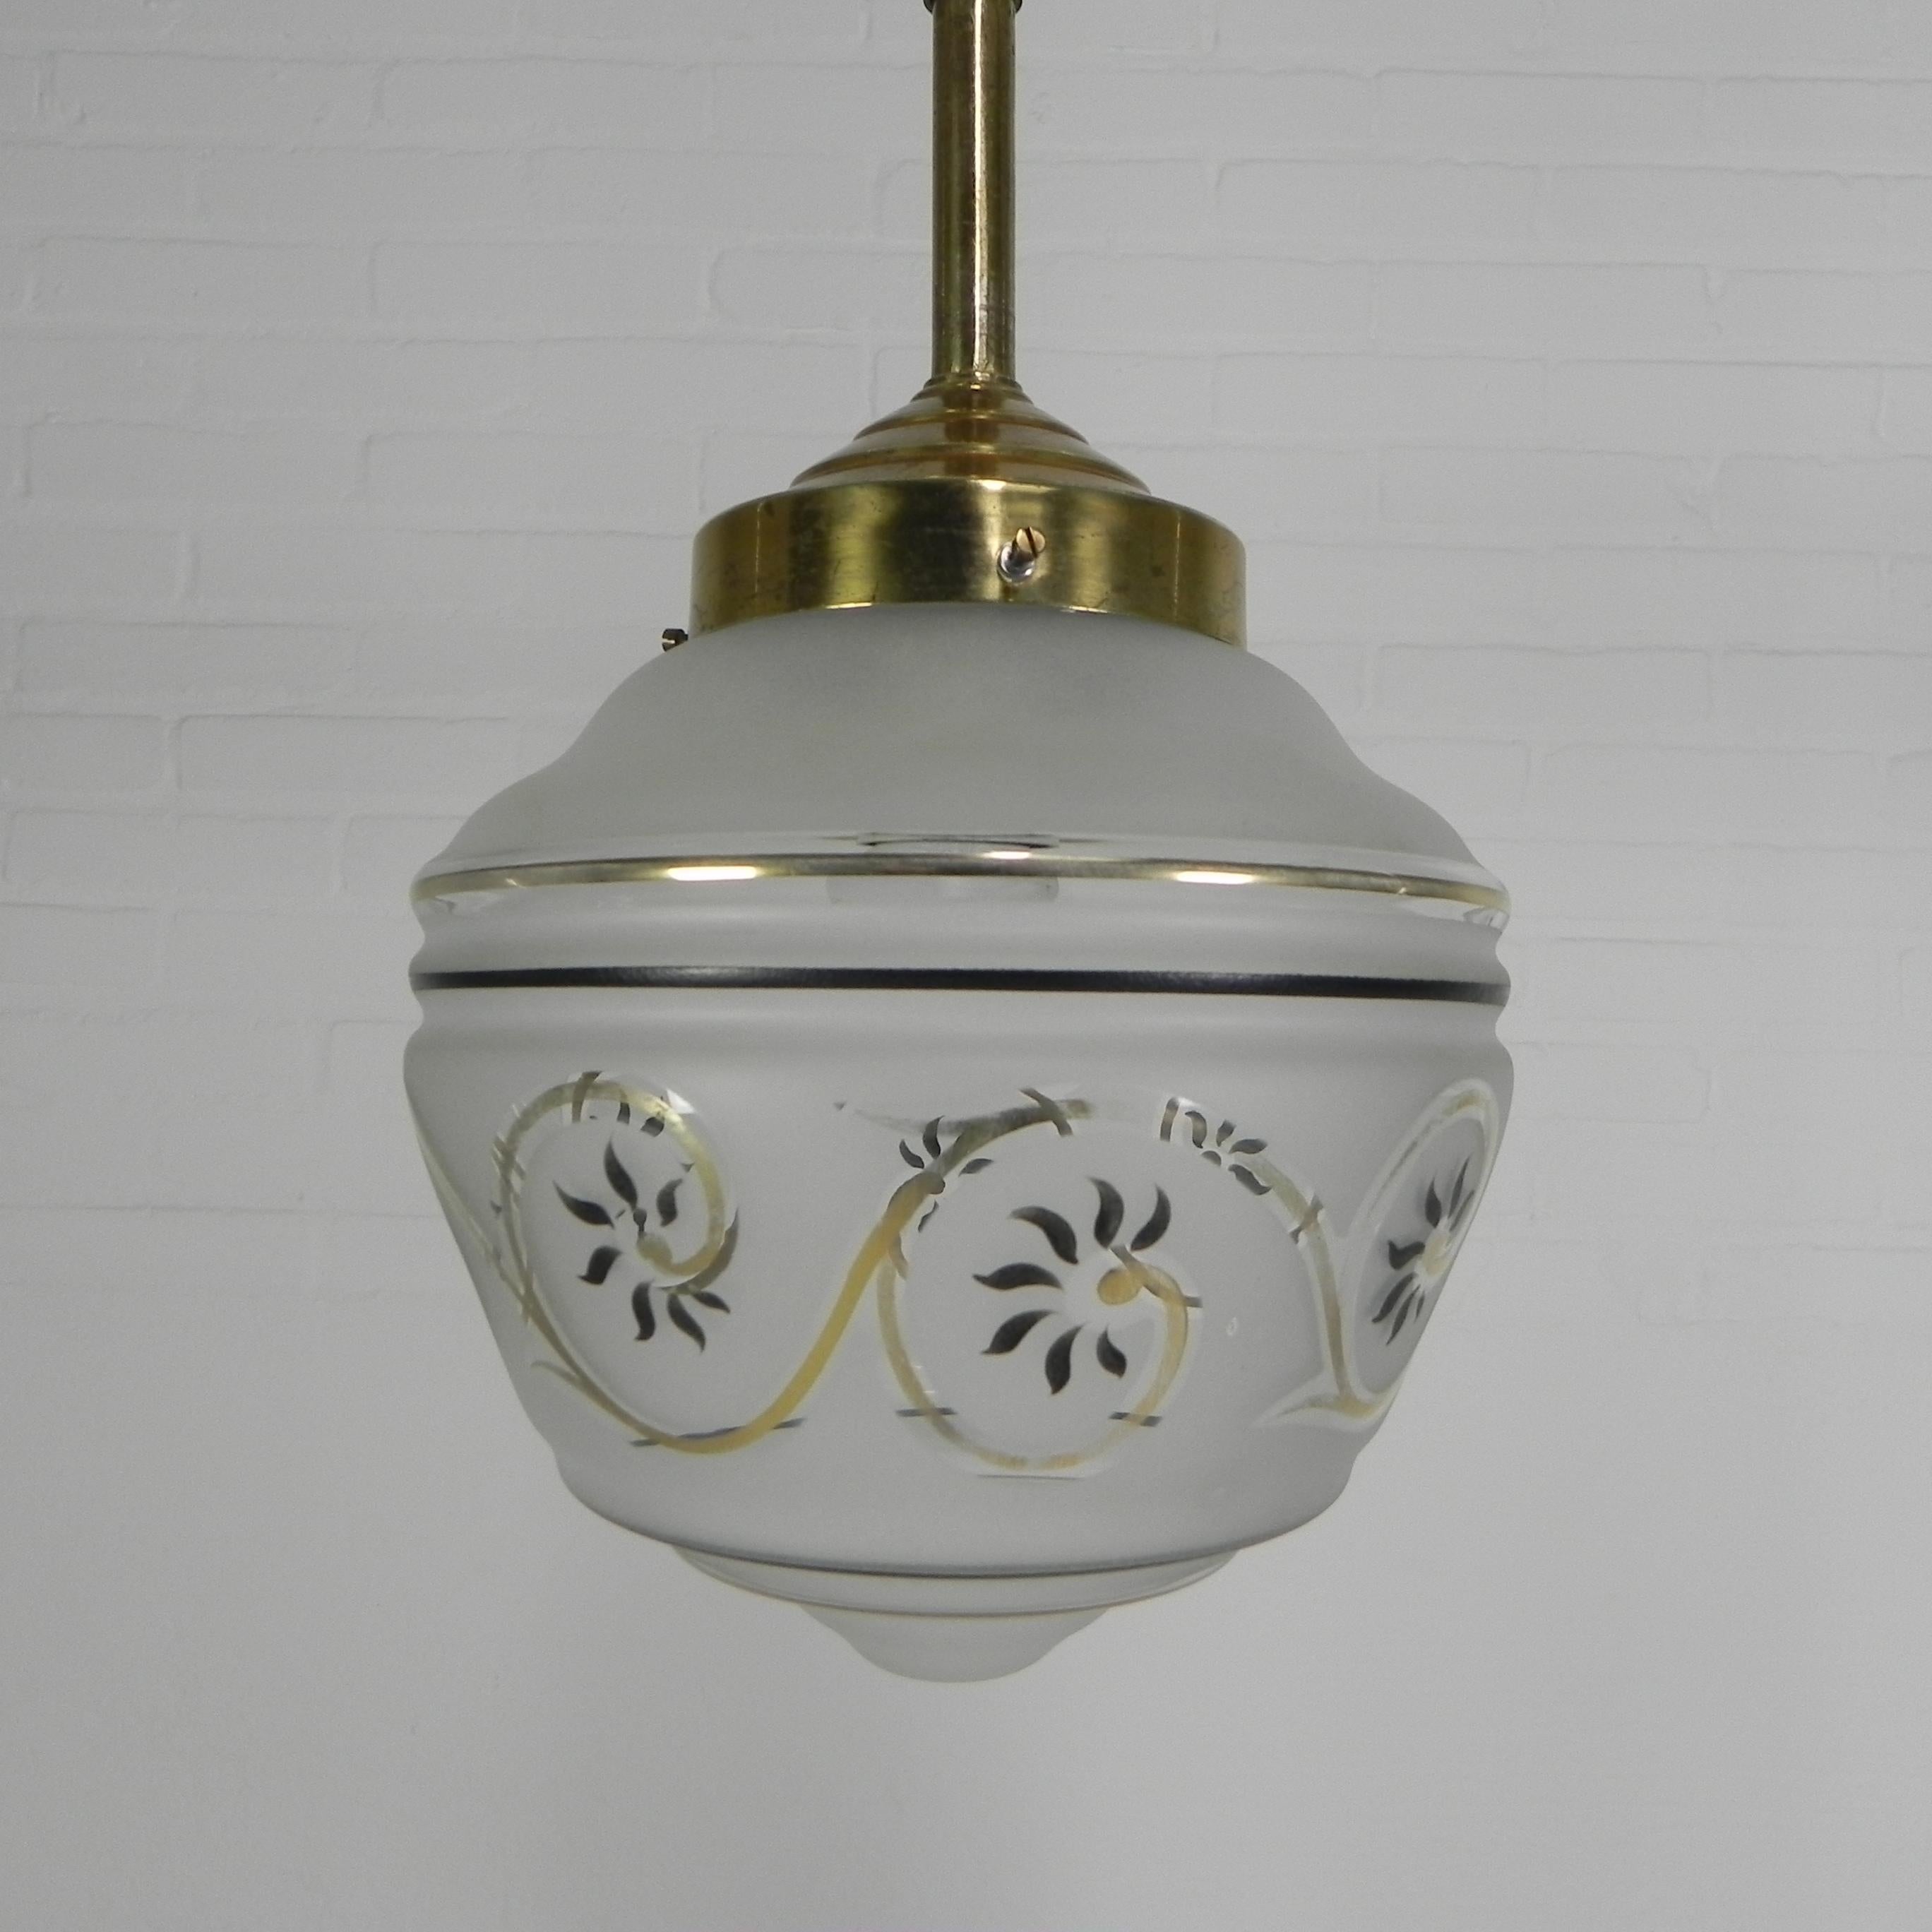 Height: 38 cm.
Ø: 19 cm.
Shade height: 19 cm.
The lamp has a large bulb holder (E27)
and new thread.
Origin: France, 1930s.
Material: glass / brass.
All our lamps are suitable for LED lamps.